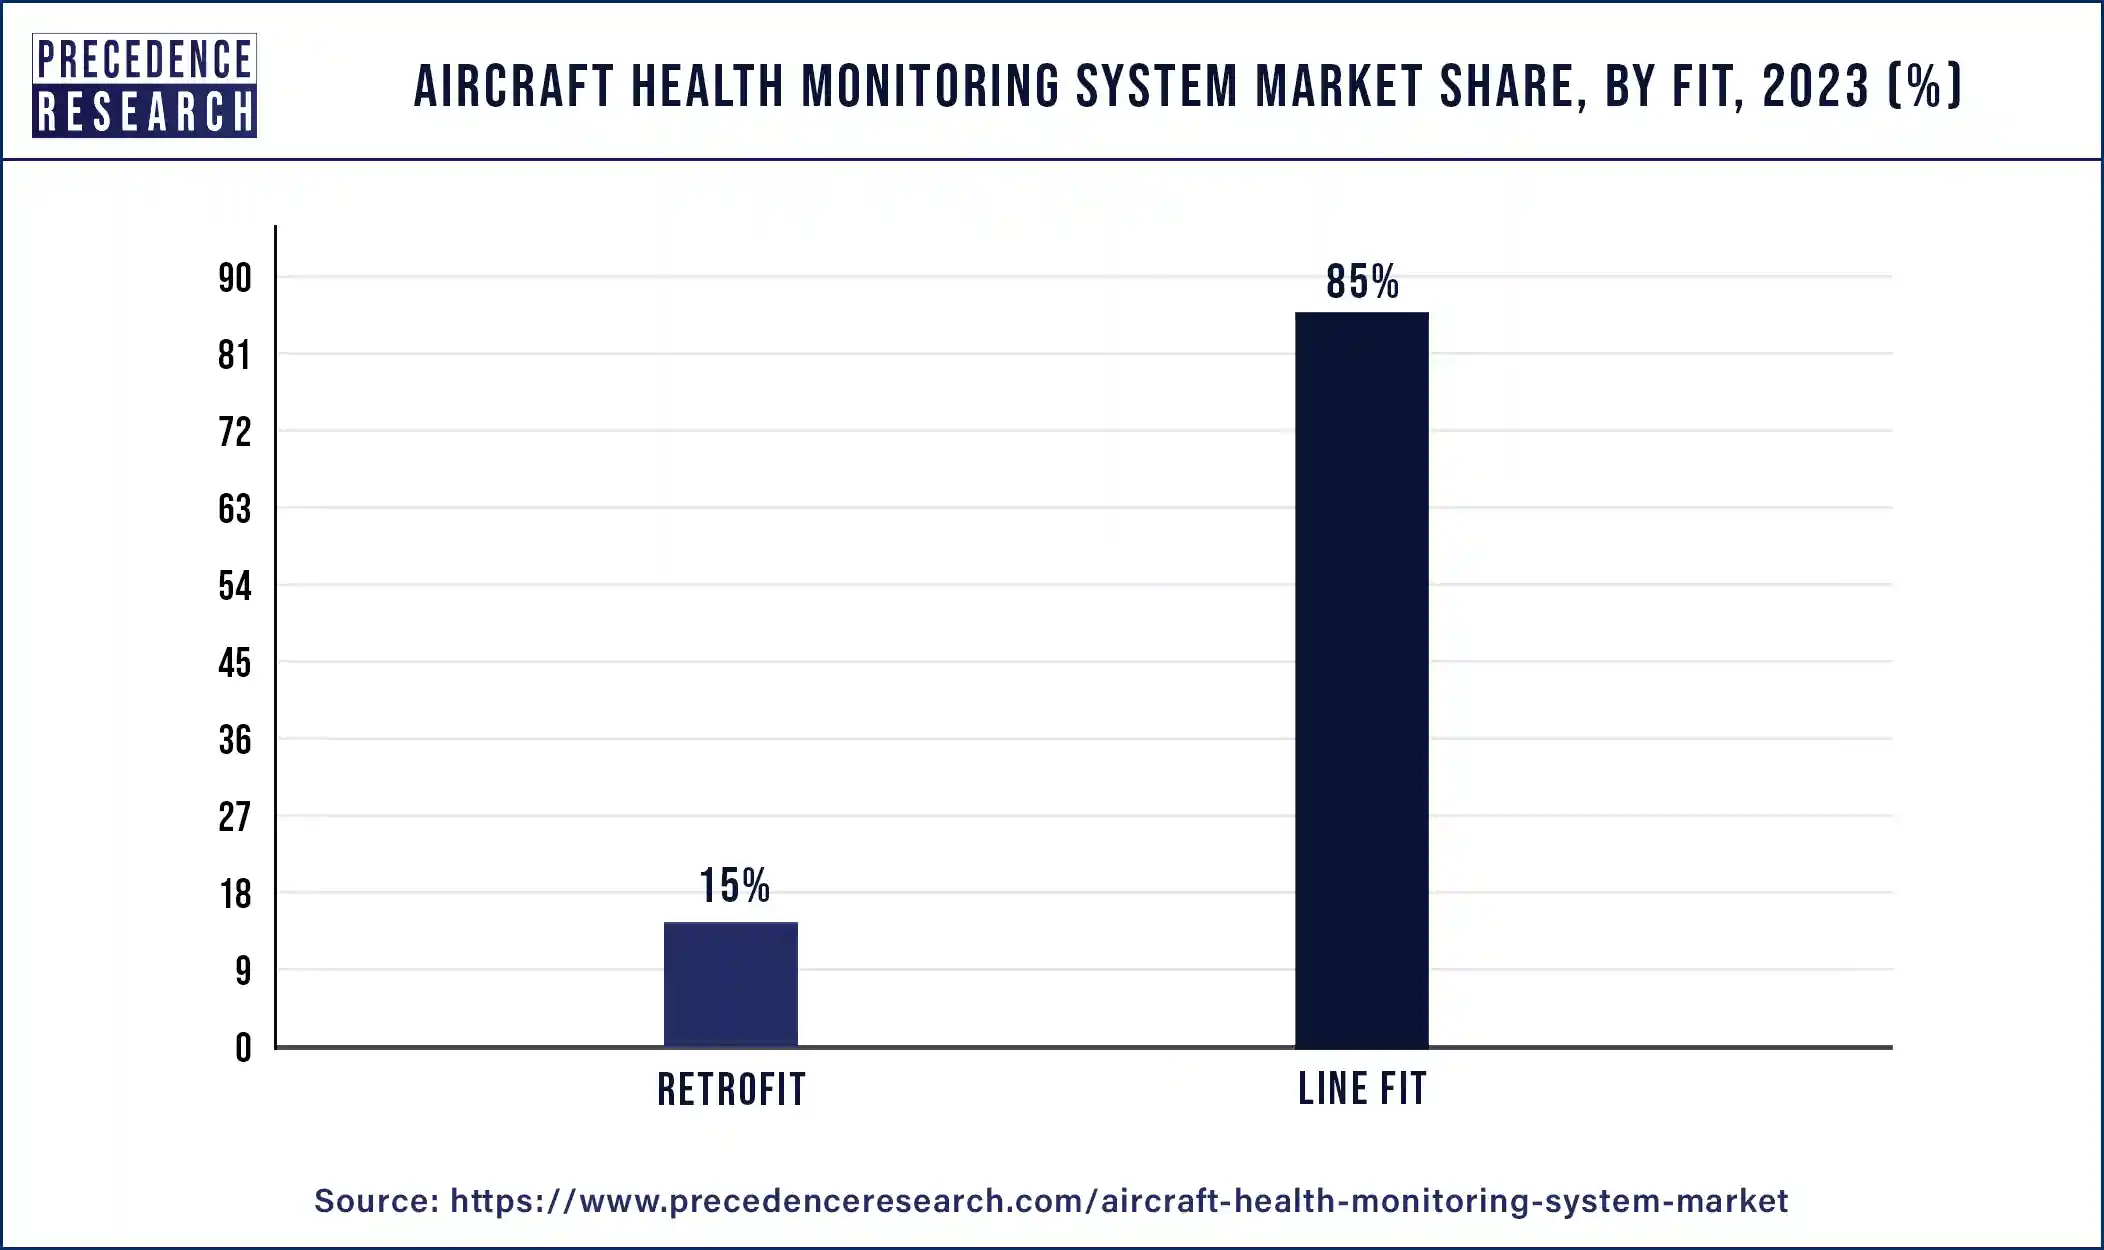 Aircraft Health Monitoring System Market Share, By Fit, 2023 (%)